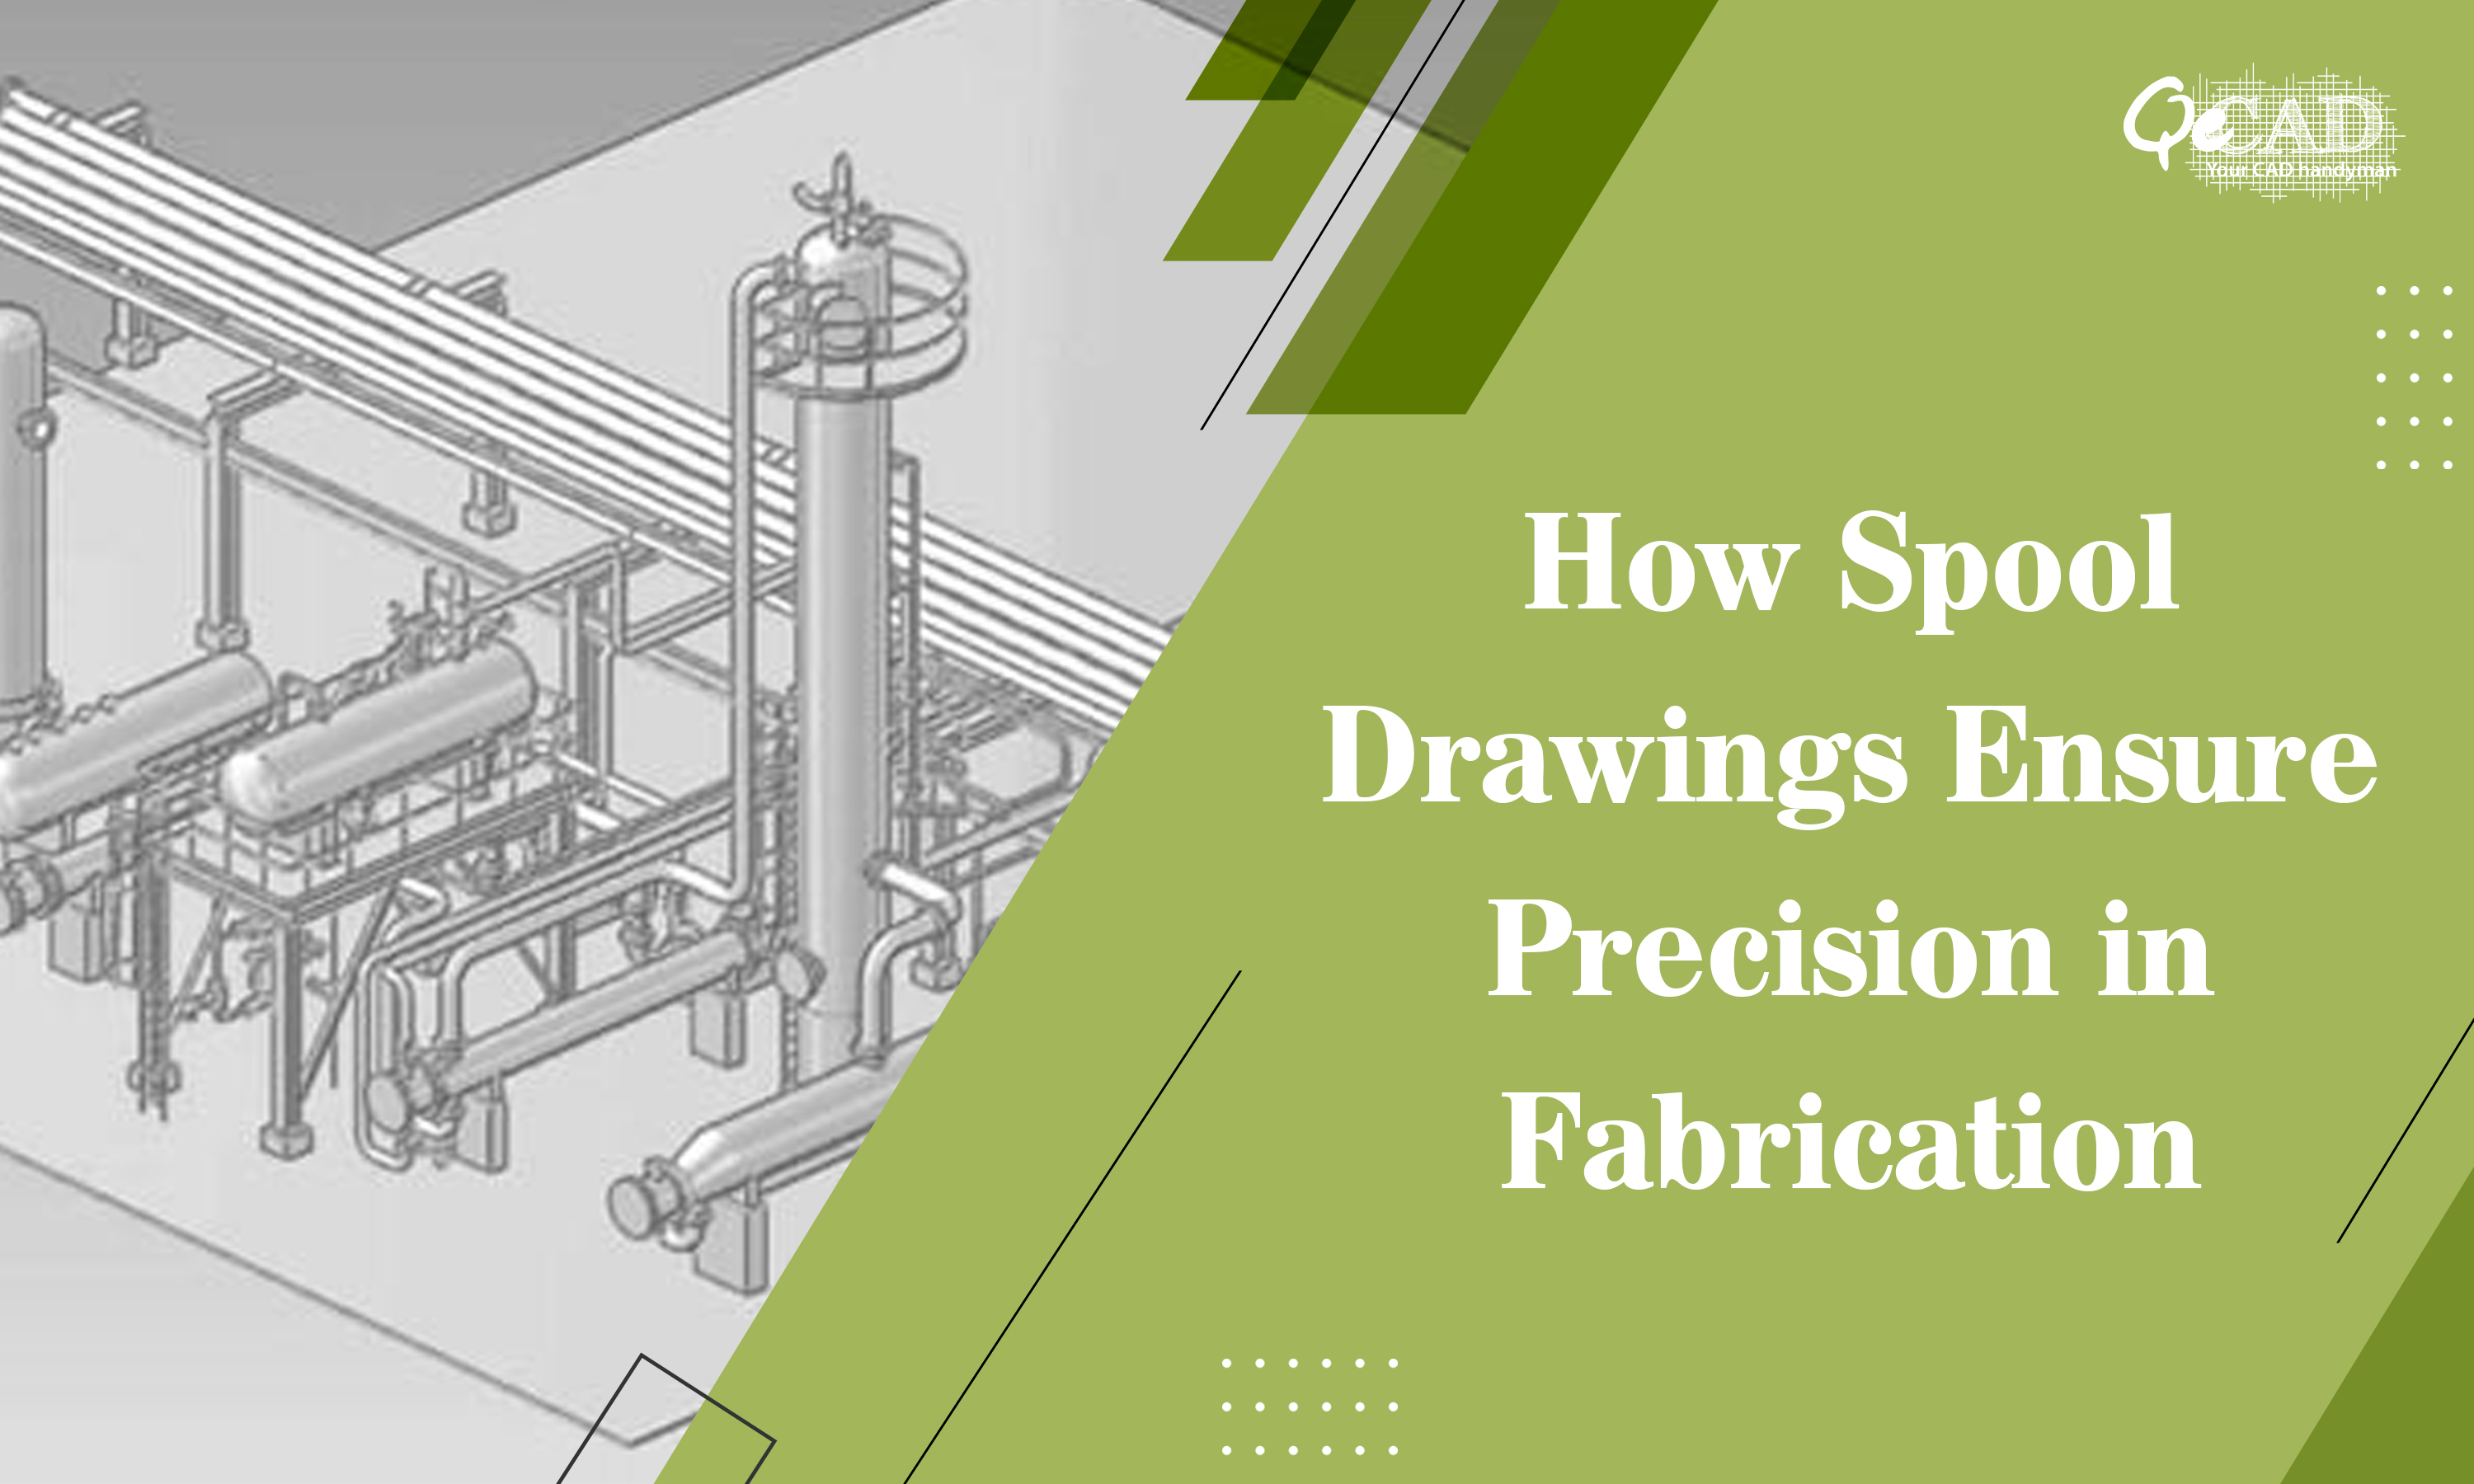 How Spool Drawings Ensure Precision in Fabrication